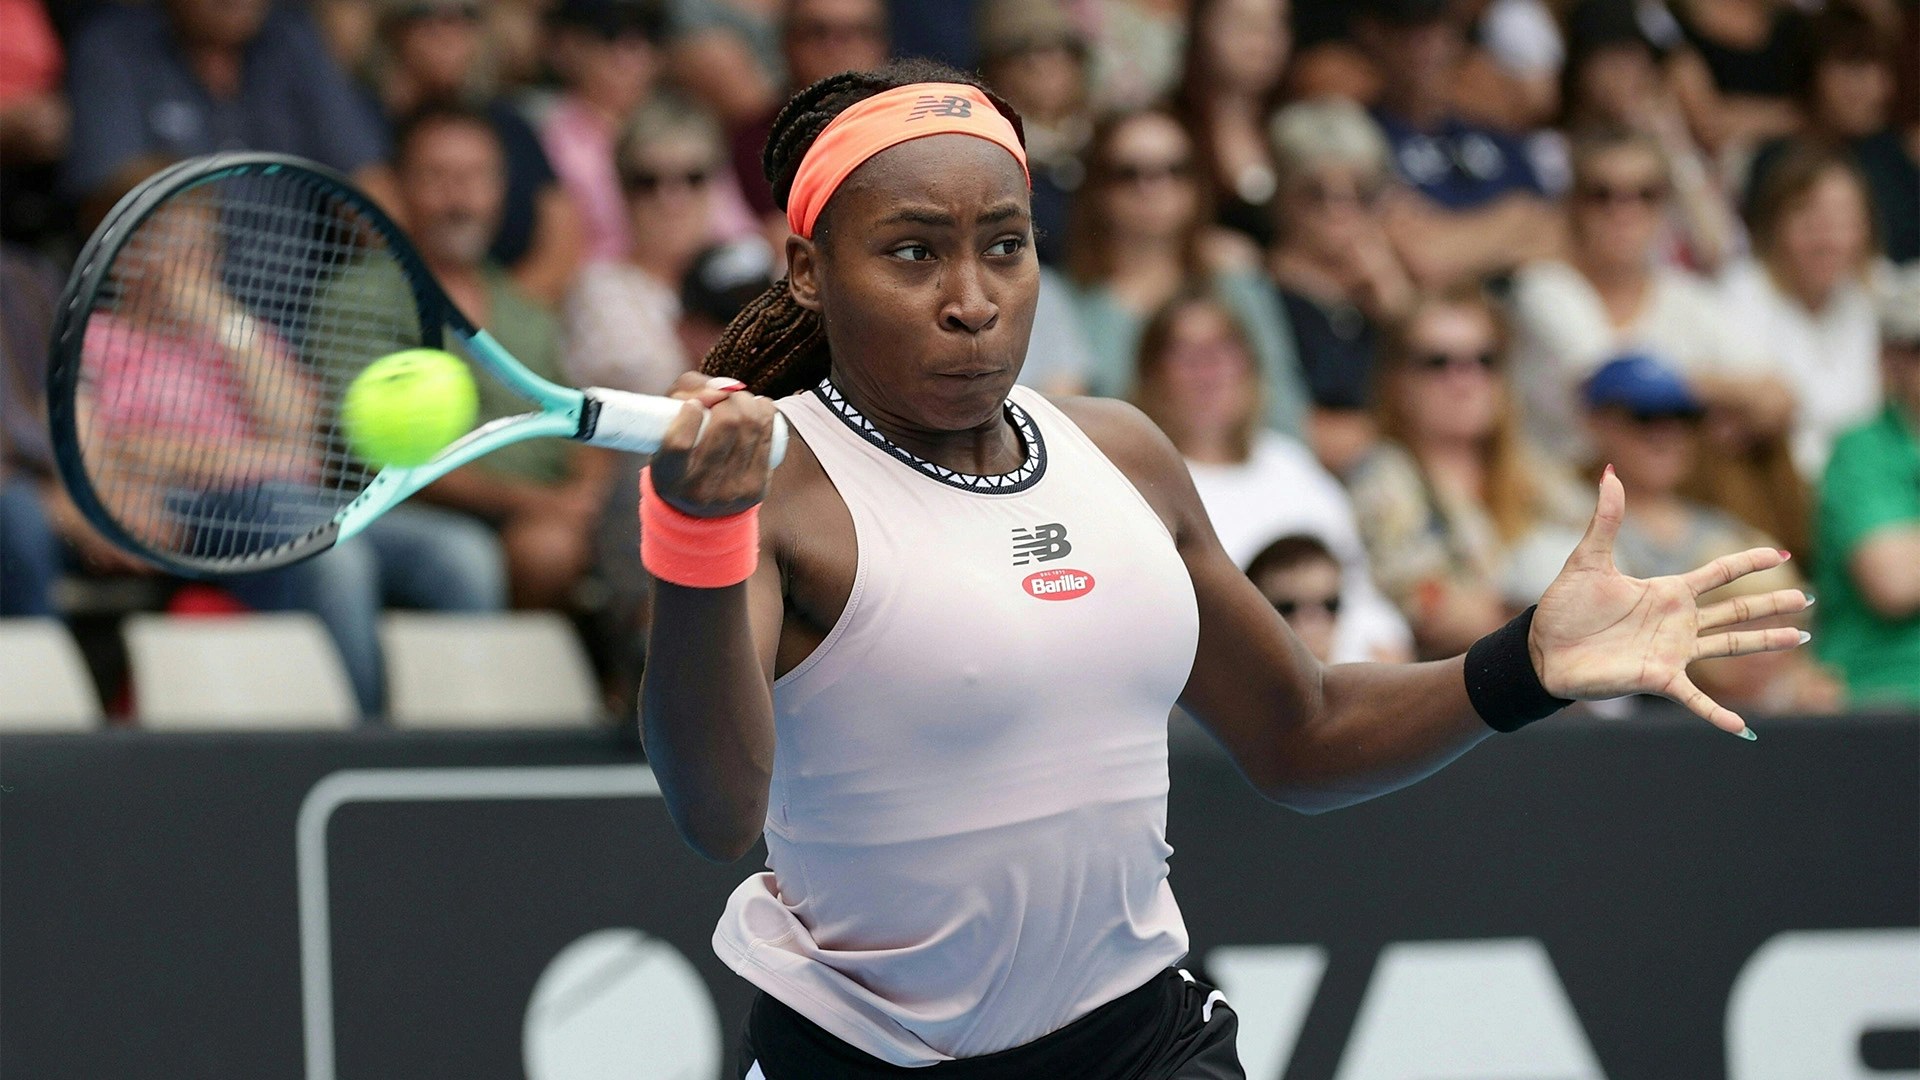 Italian Open Highlights: Coco Gauff defeats Yulia Putintseva in second  round, Aryna Sabalenka and Jessica Pegula bow out - Check Out